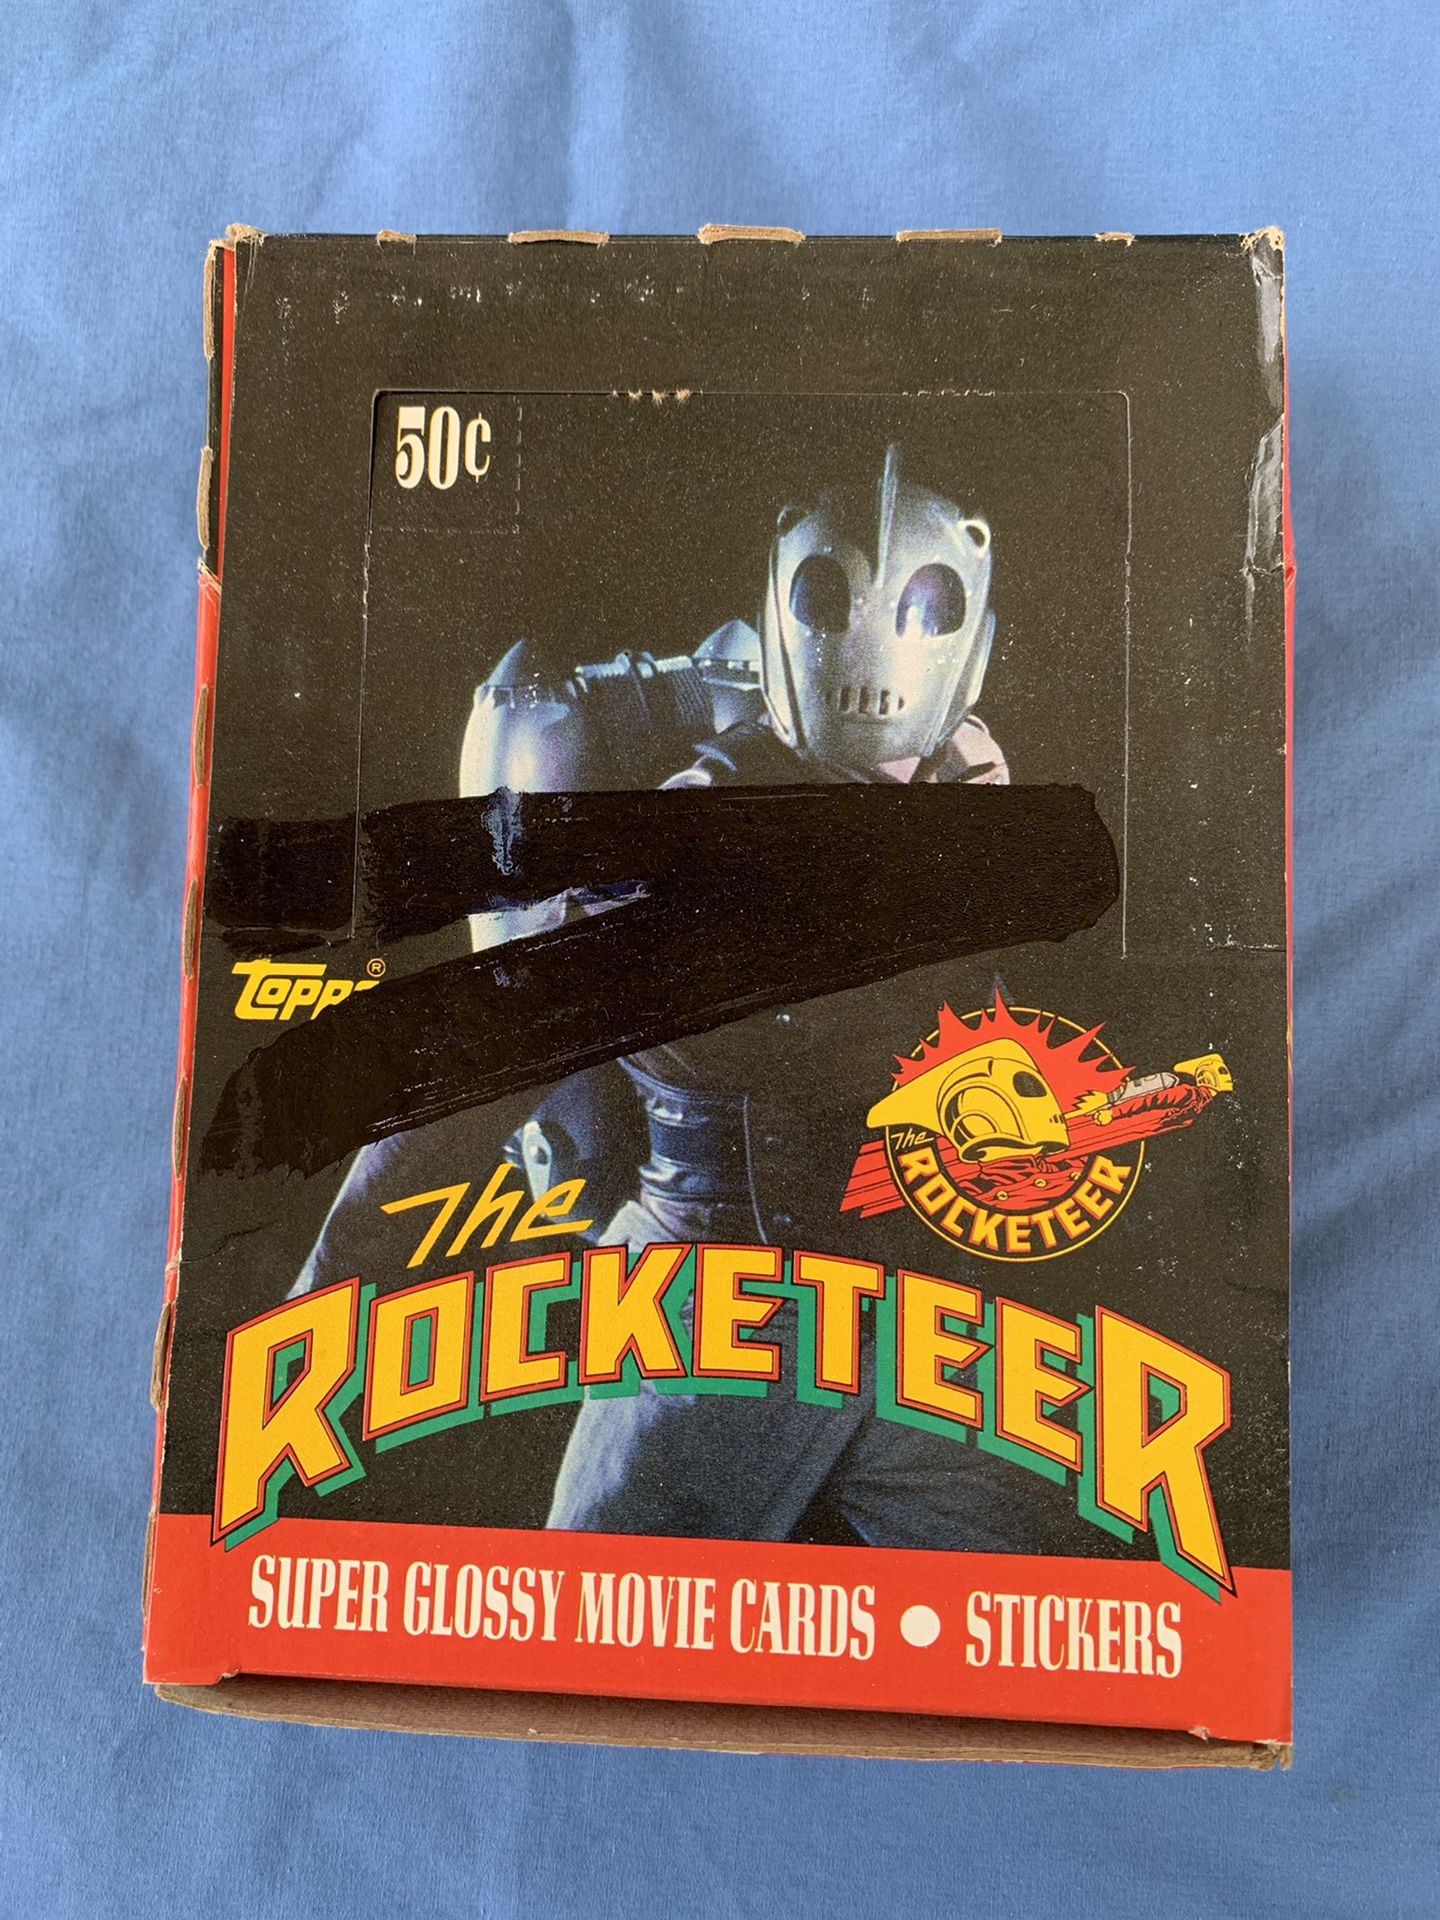 THE ROCKETEER TOPPS WAX BOX  Super Glossy Movie Cards •Stickers